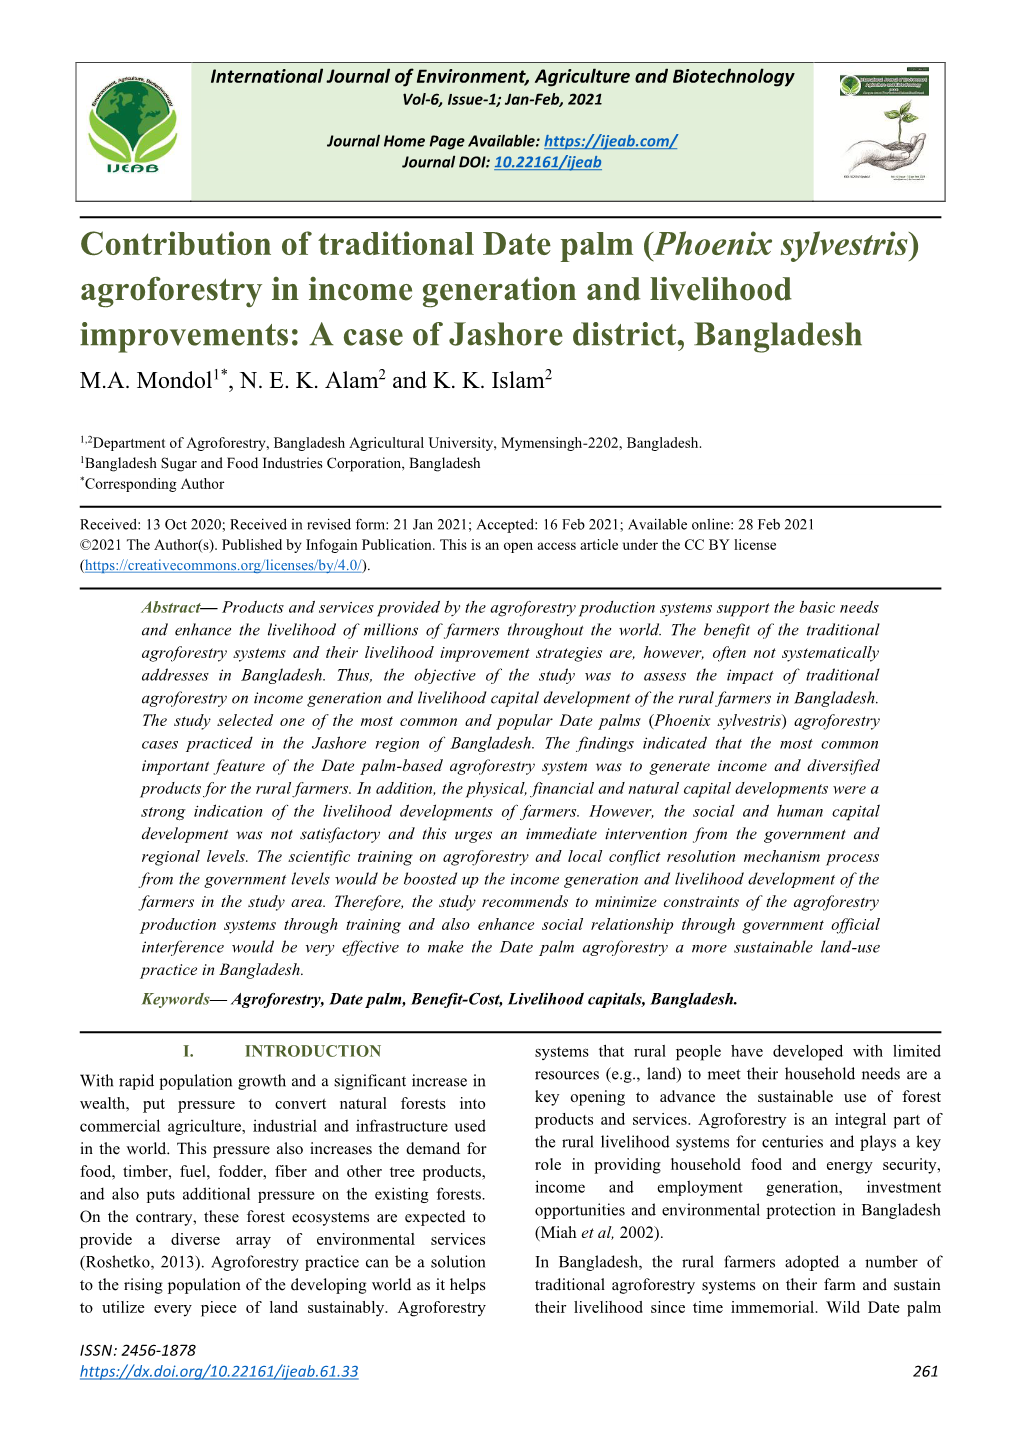 Contribution of Traditional Date Palm (Phoenix Sylvestris) Agroforestry in Income Generation and Livelihood Improvements: a Case of Jashore District, Bangladesh M.A